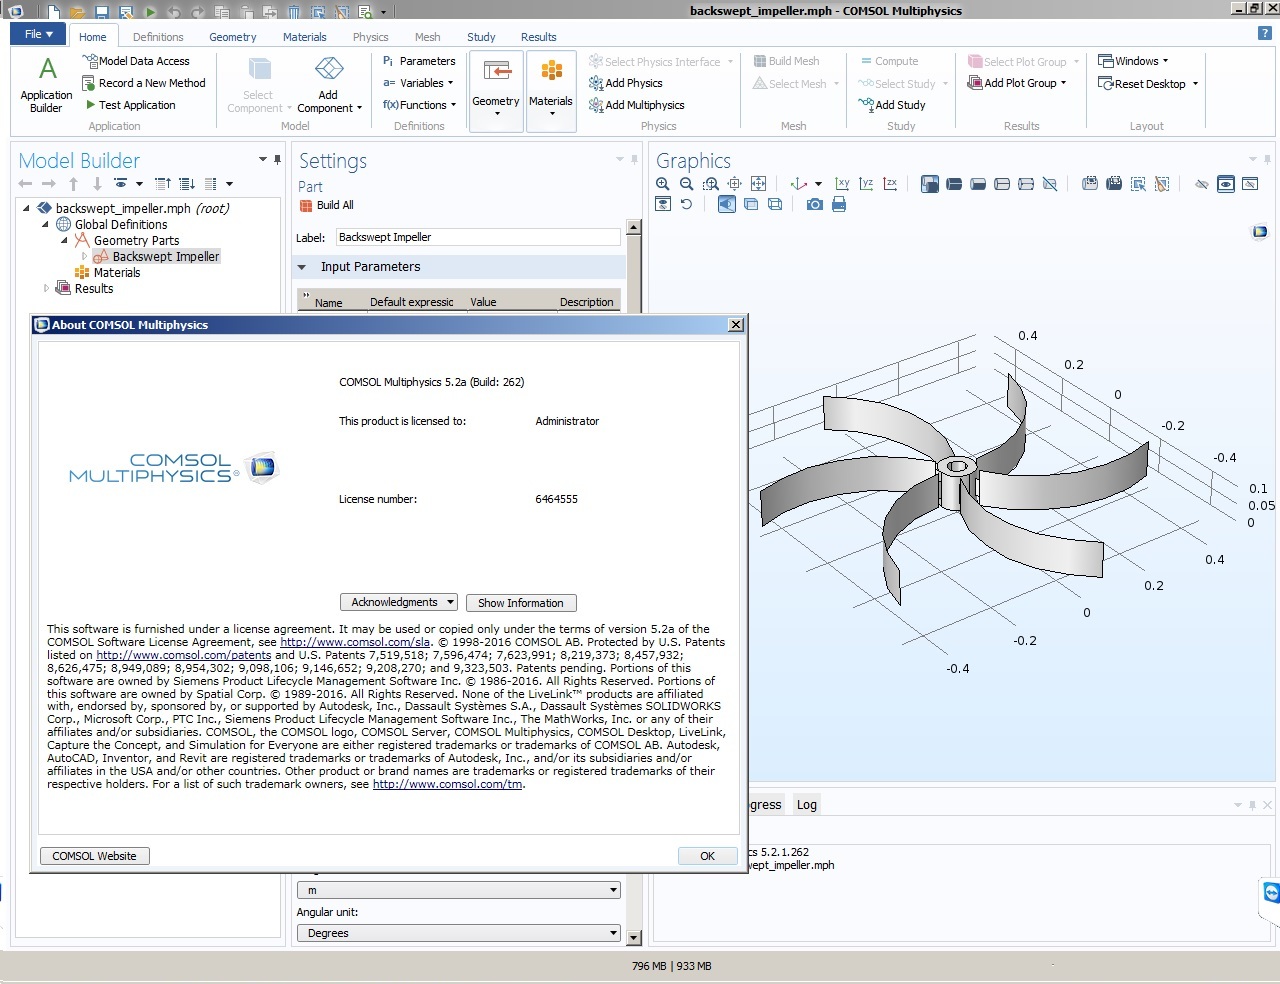 working with Comsol Multiphysics 5.2a Update3 Full Win-Linux x64